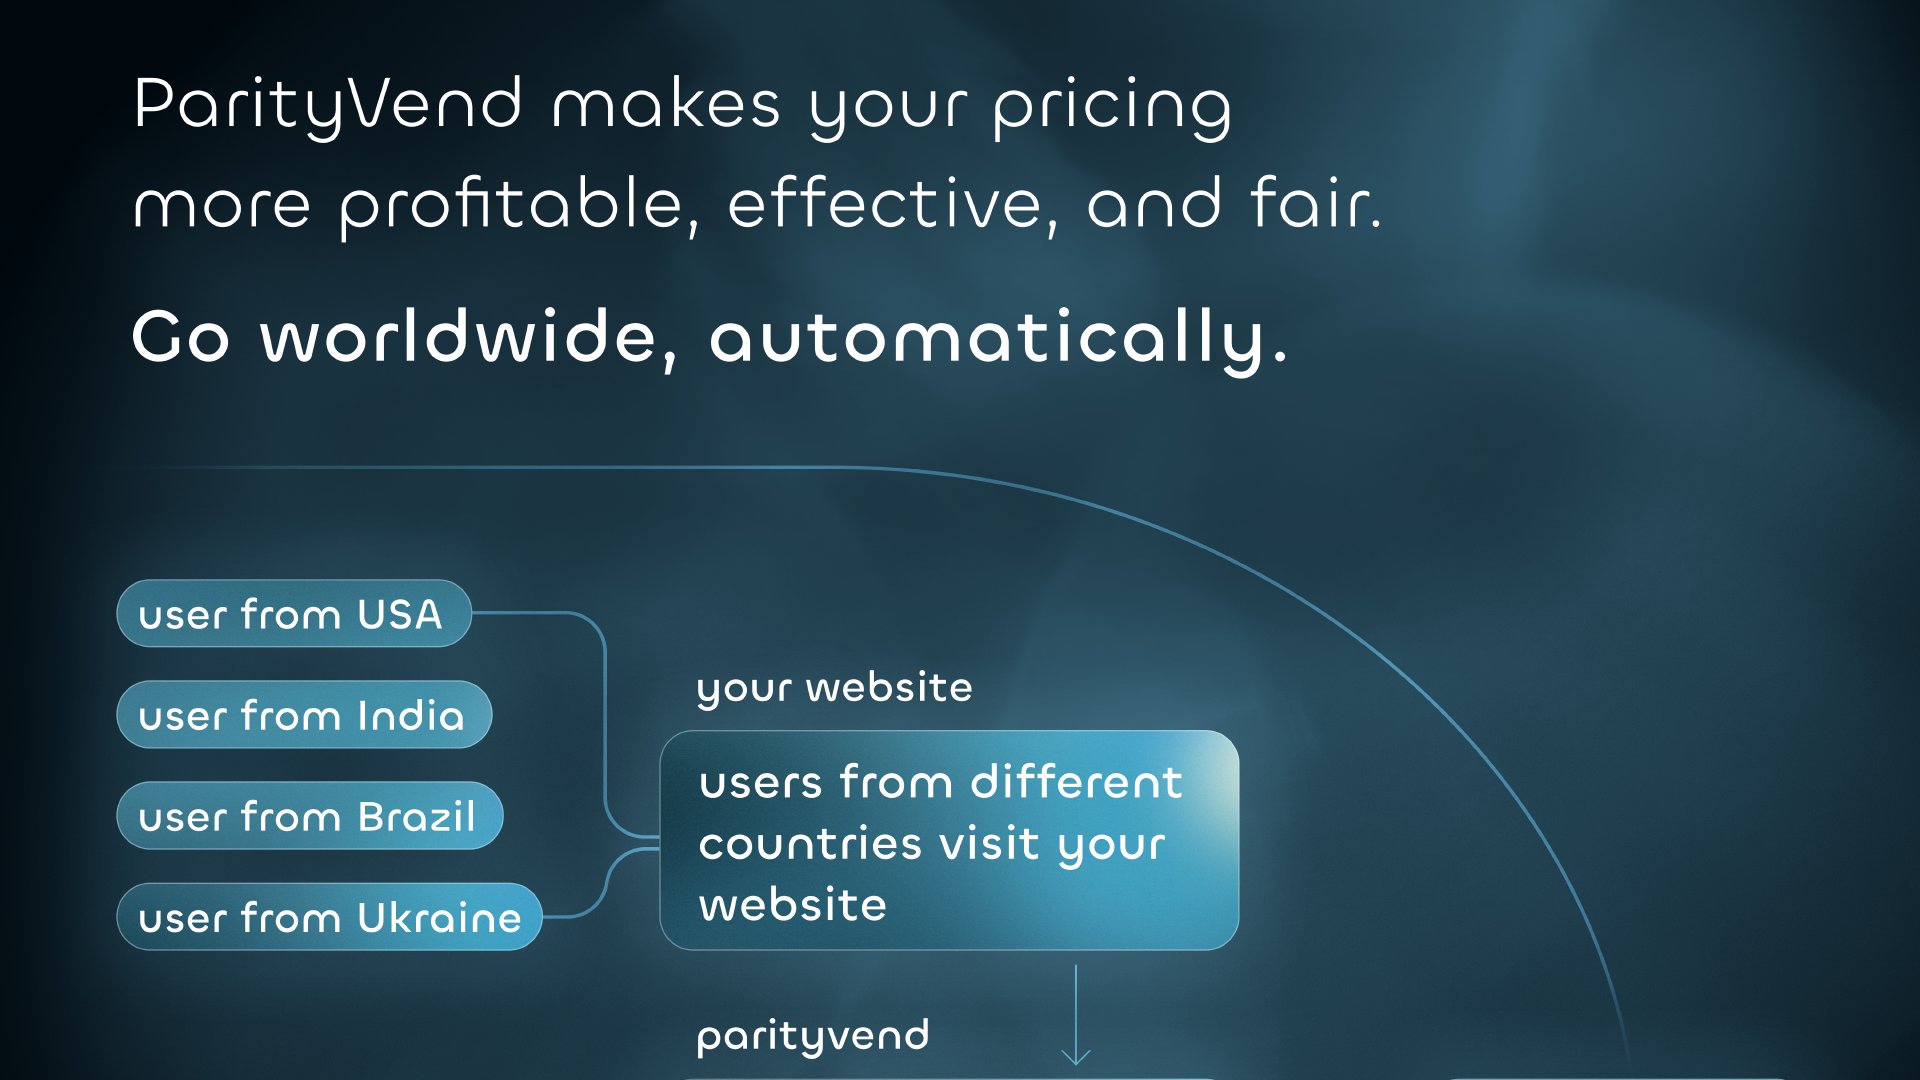 ParityVend makes your pricing more profitable, effective, and fair. Go worldwide, automatically.